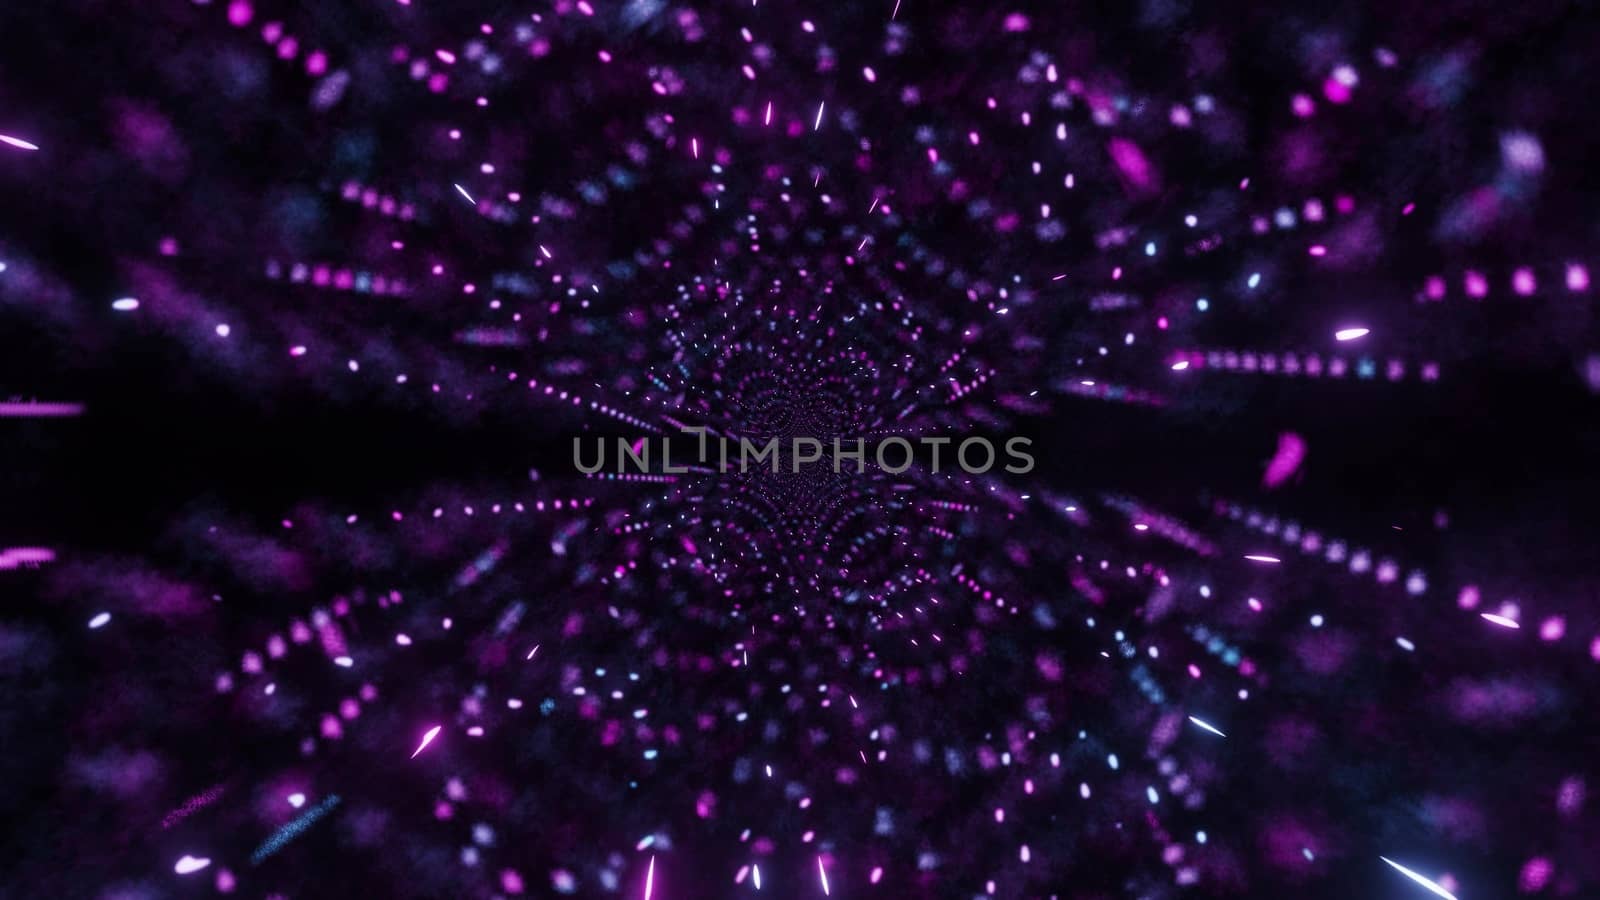 abstract glowing colorful multicolor space galaxy 3d illustration graphic design artwork background wallpaper, creative visuals 3d rendering space galaxy art